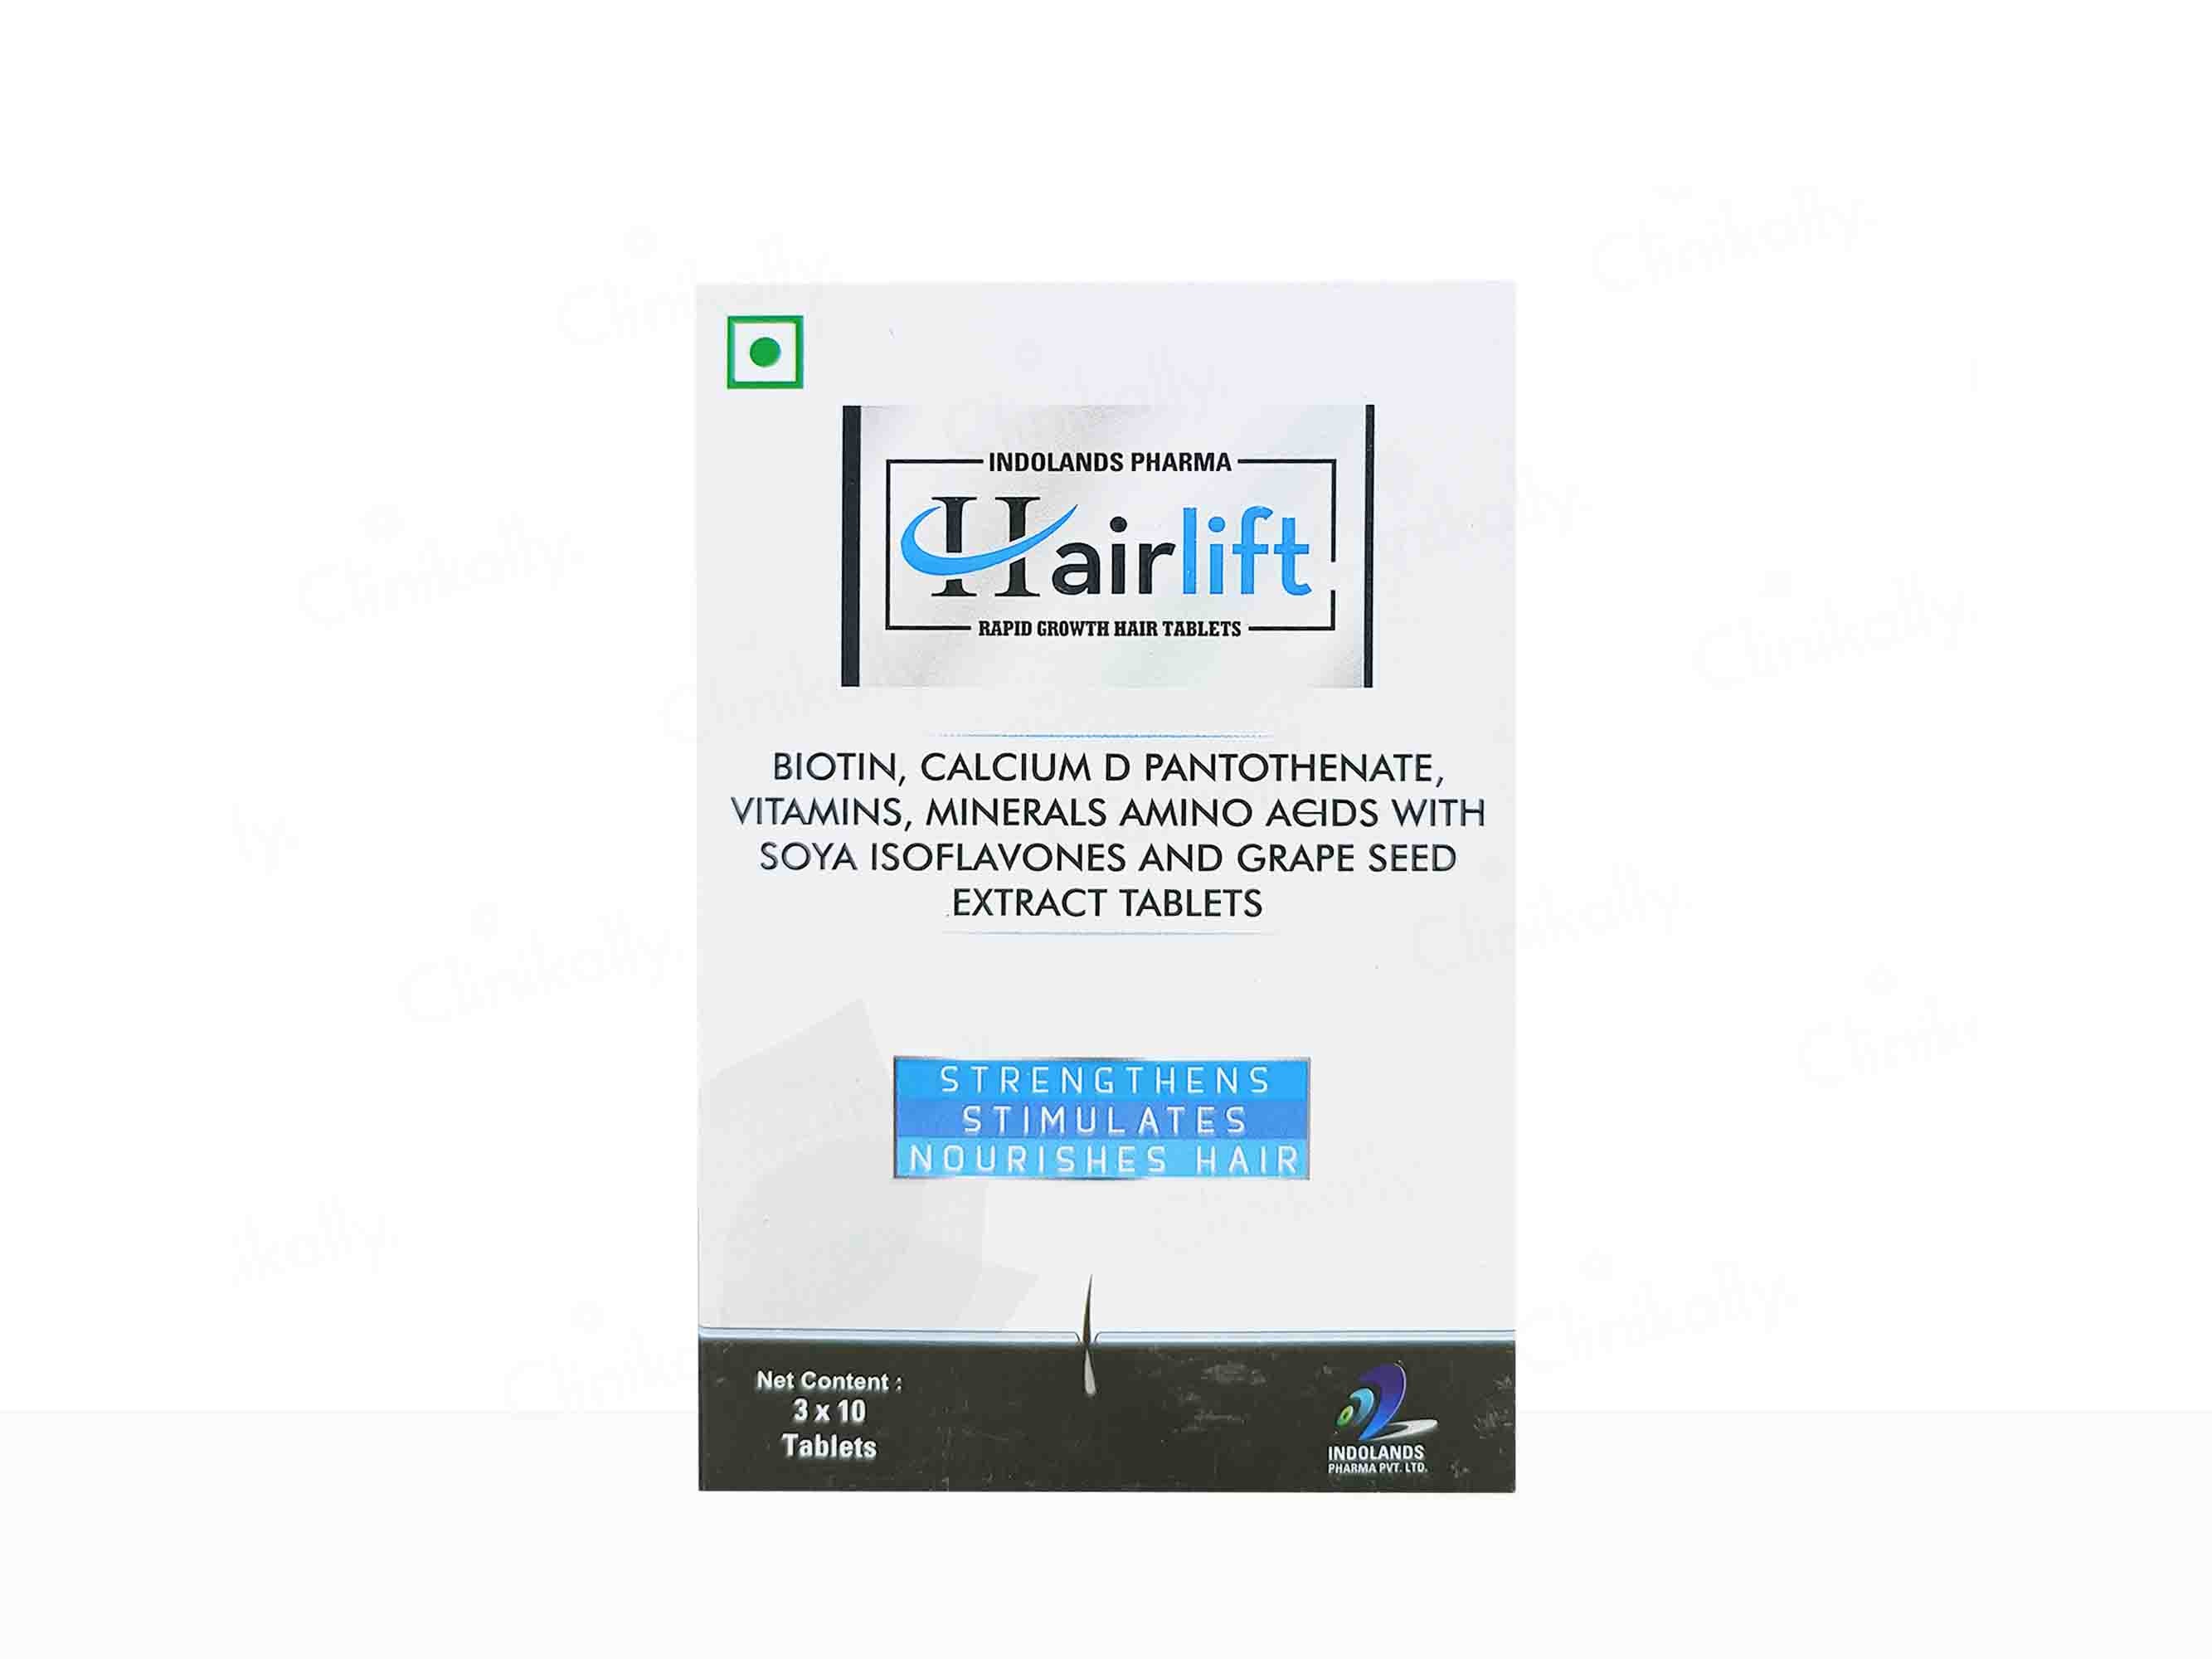 Hairlift Rapid Growth Hair Tablet